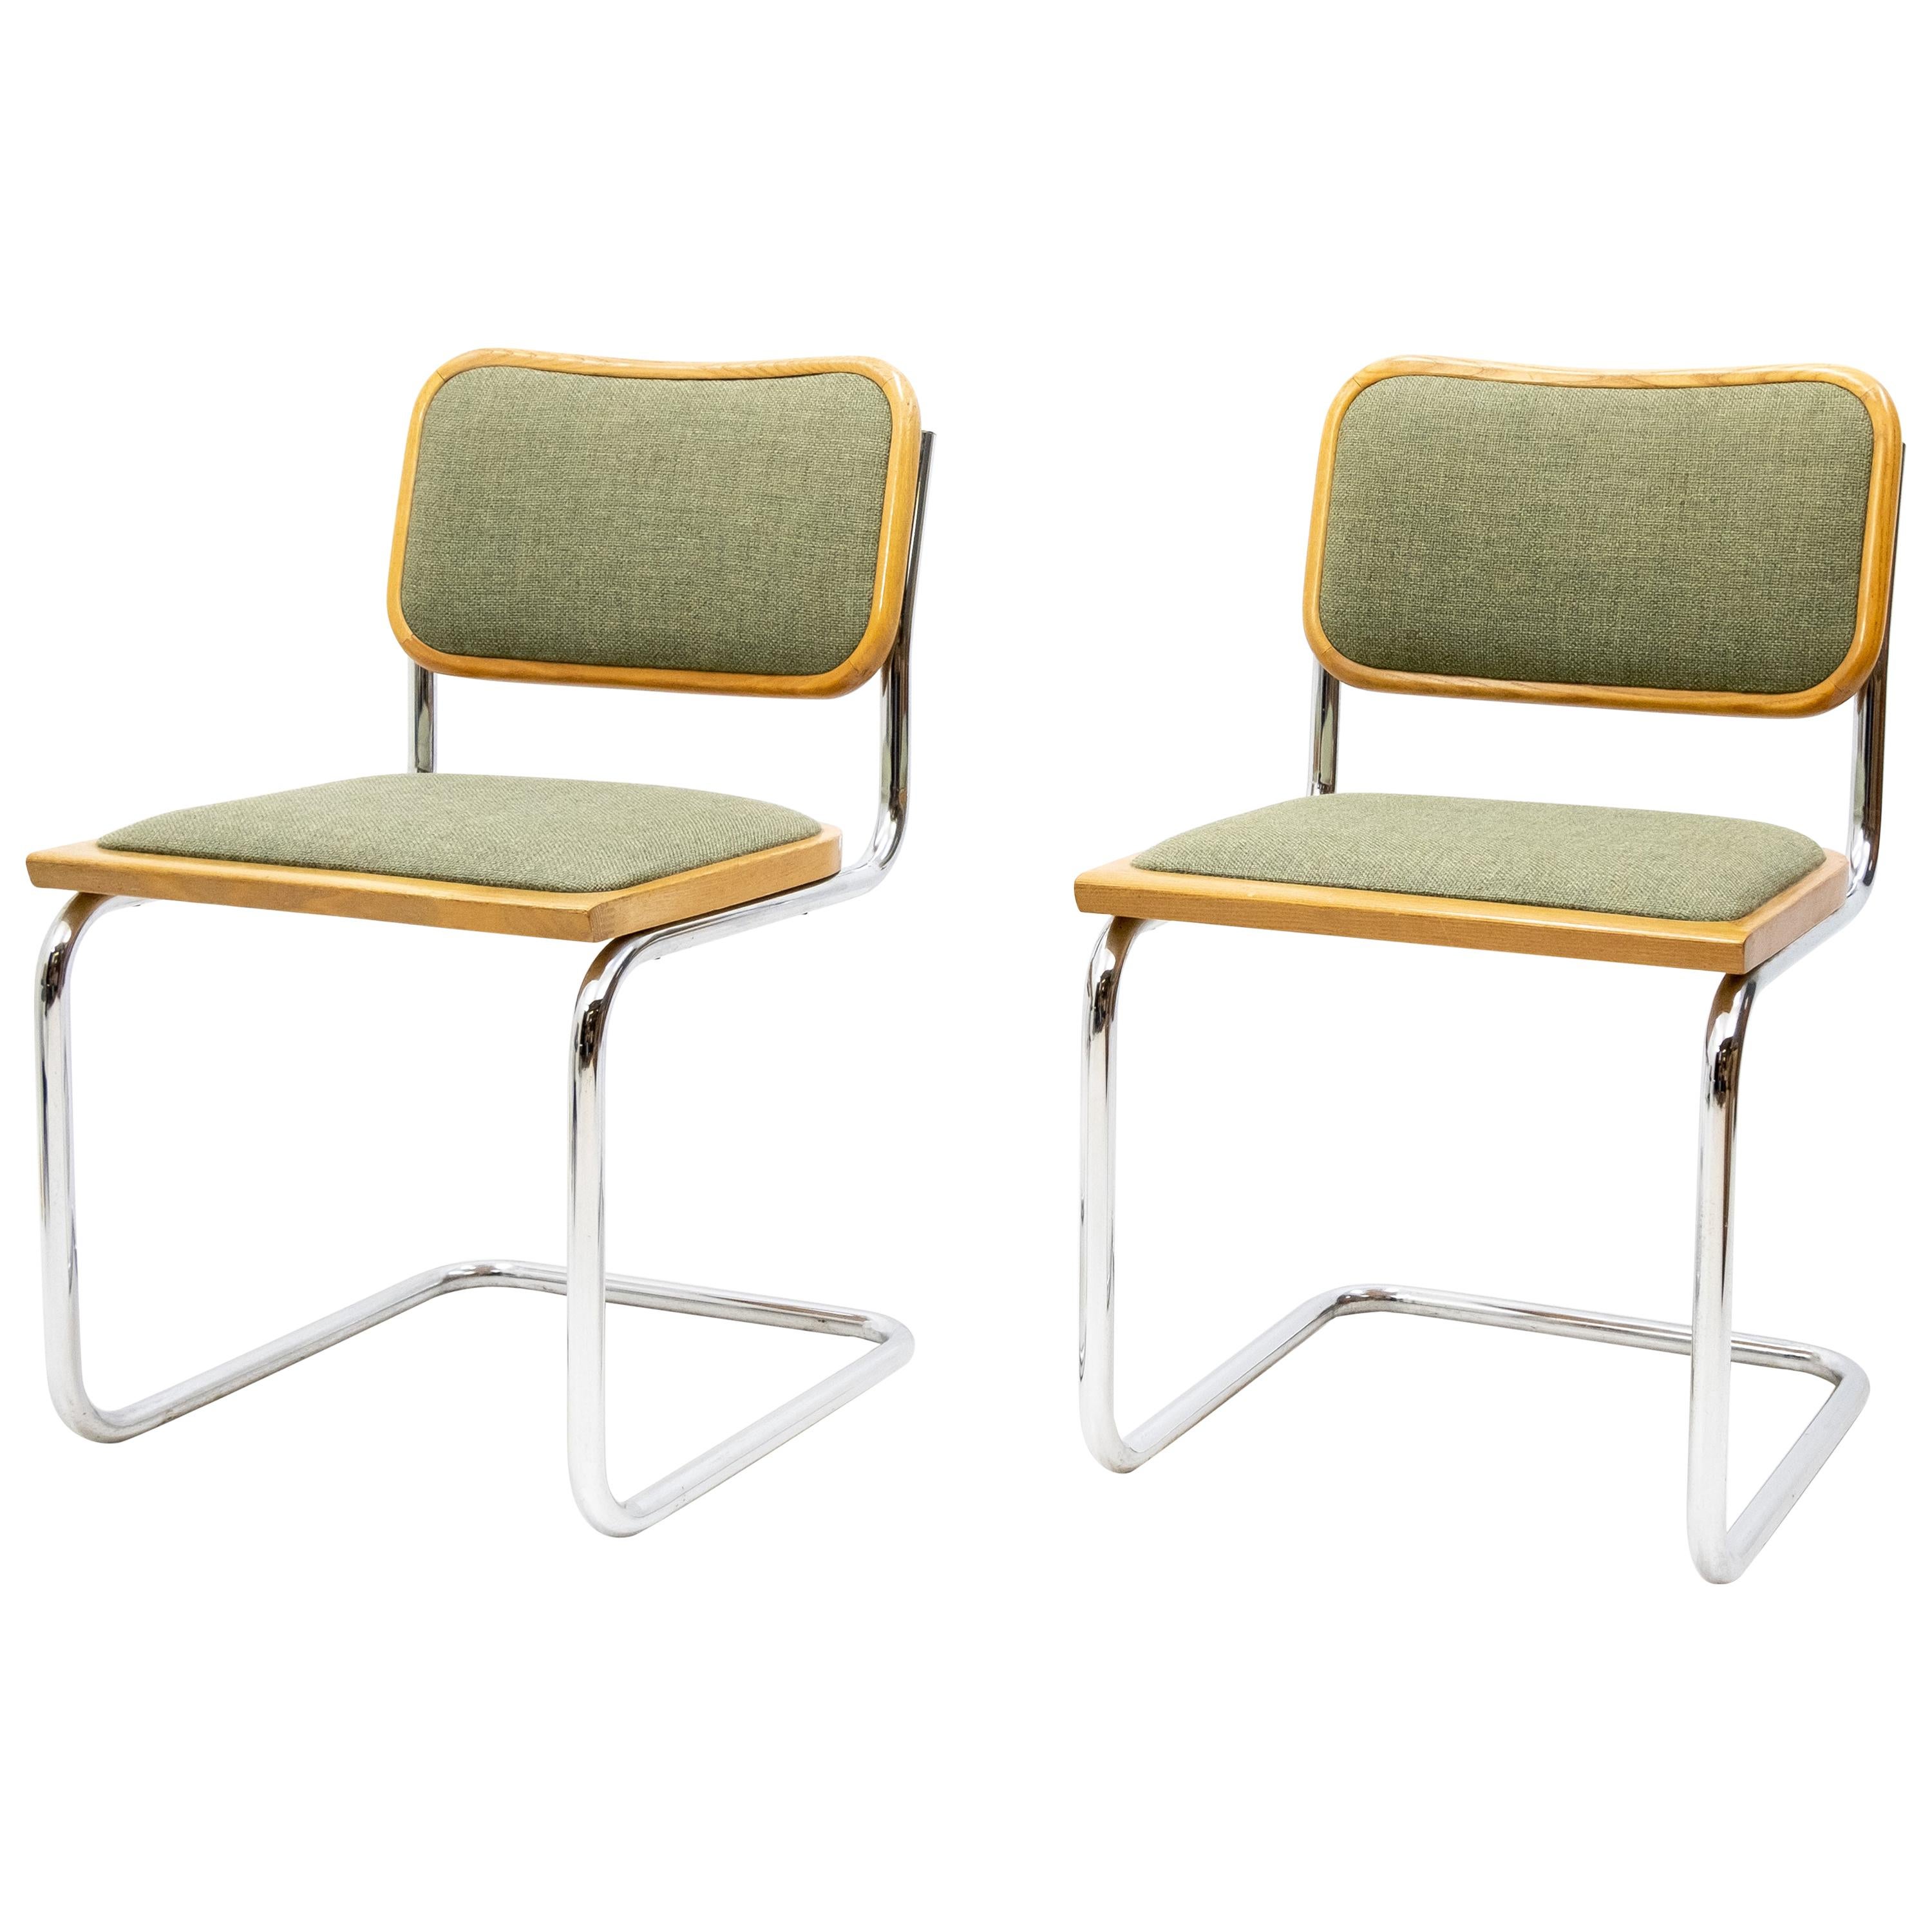 Marcel Breuer S32 Cantilever Chairs